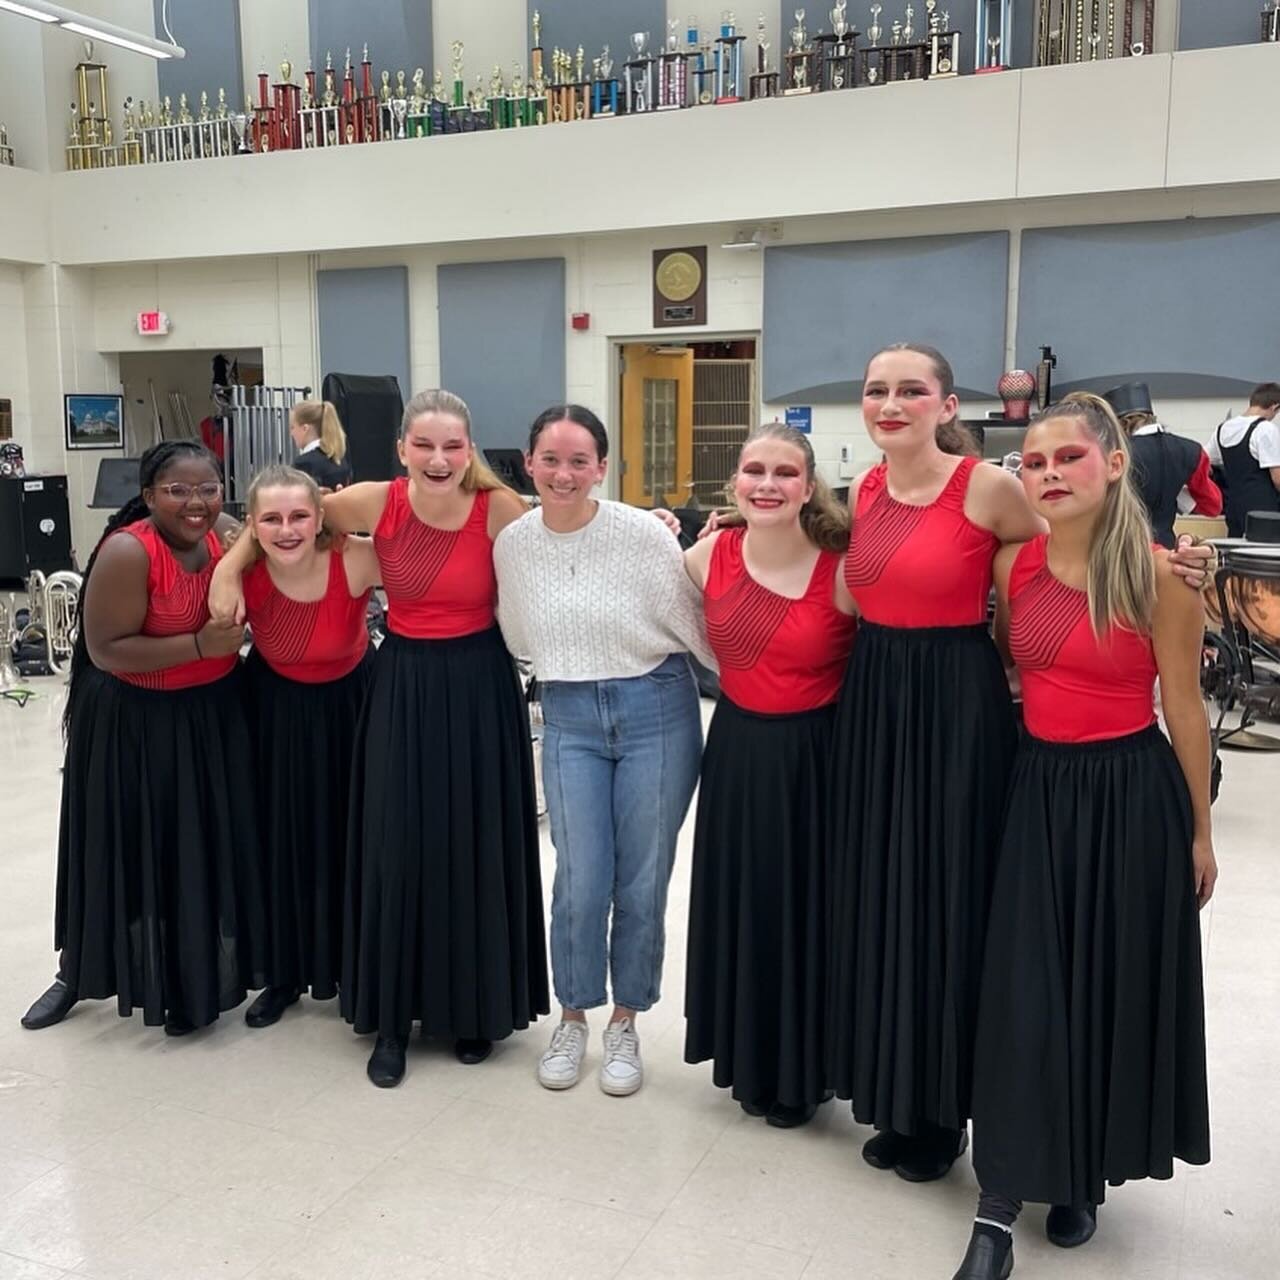 I would say the Colorguard slayed at Panther Creek, Thank you so much @panthercreekband for hosting a wonderful competition!
Look out for the Sanderson Colorguard at the Mustang Classic🤟